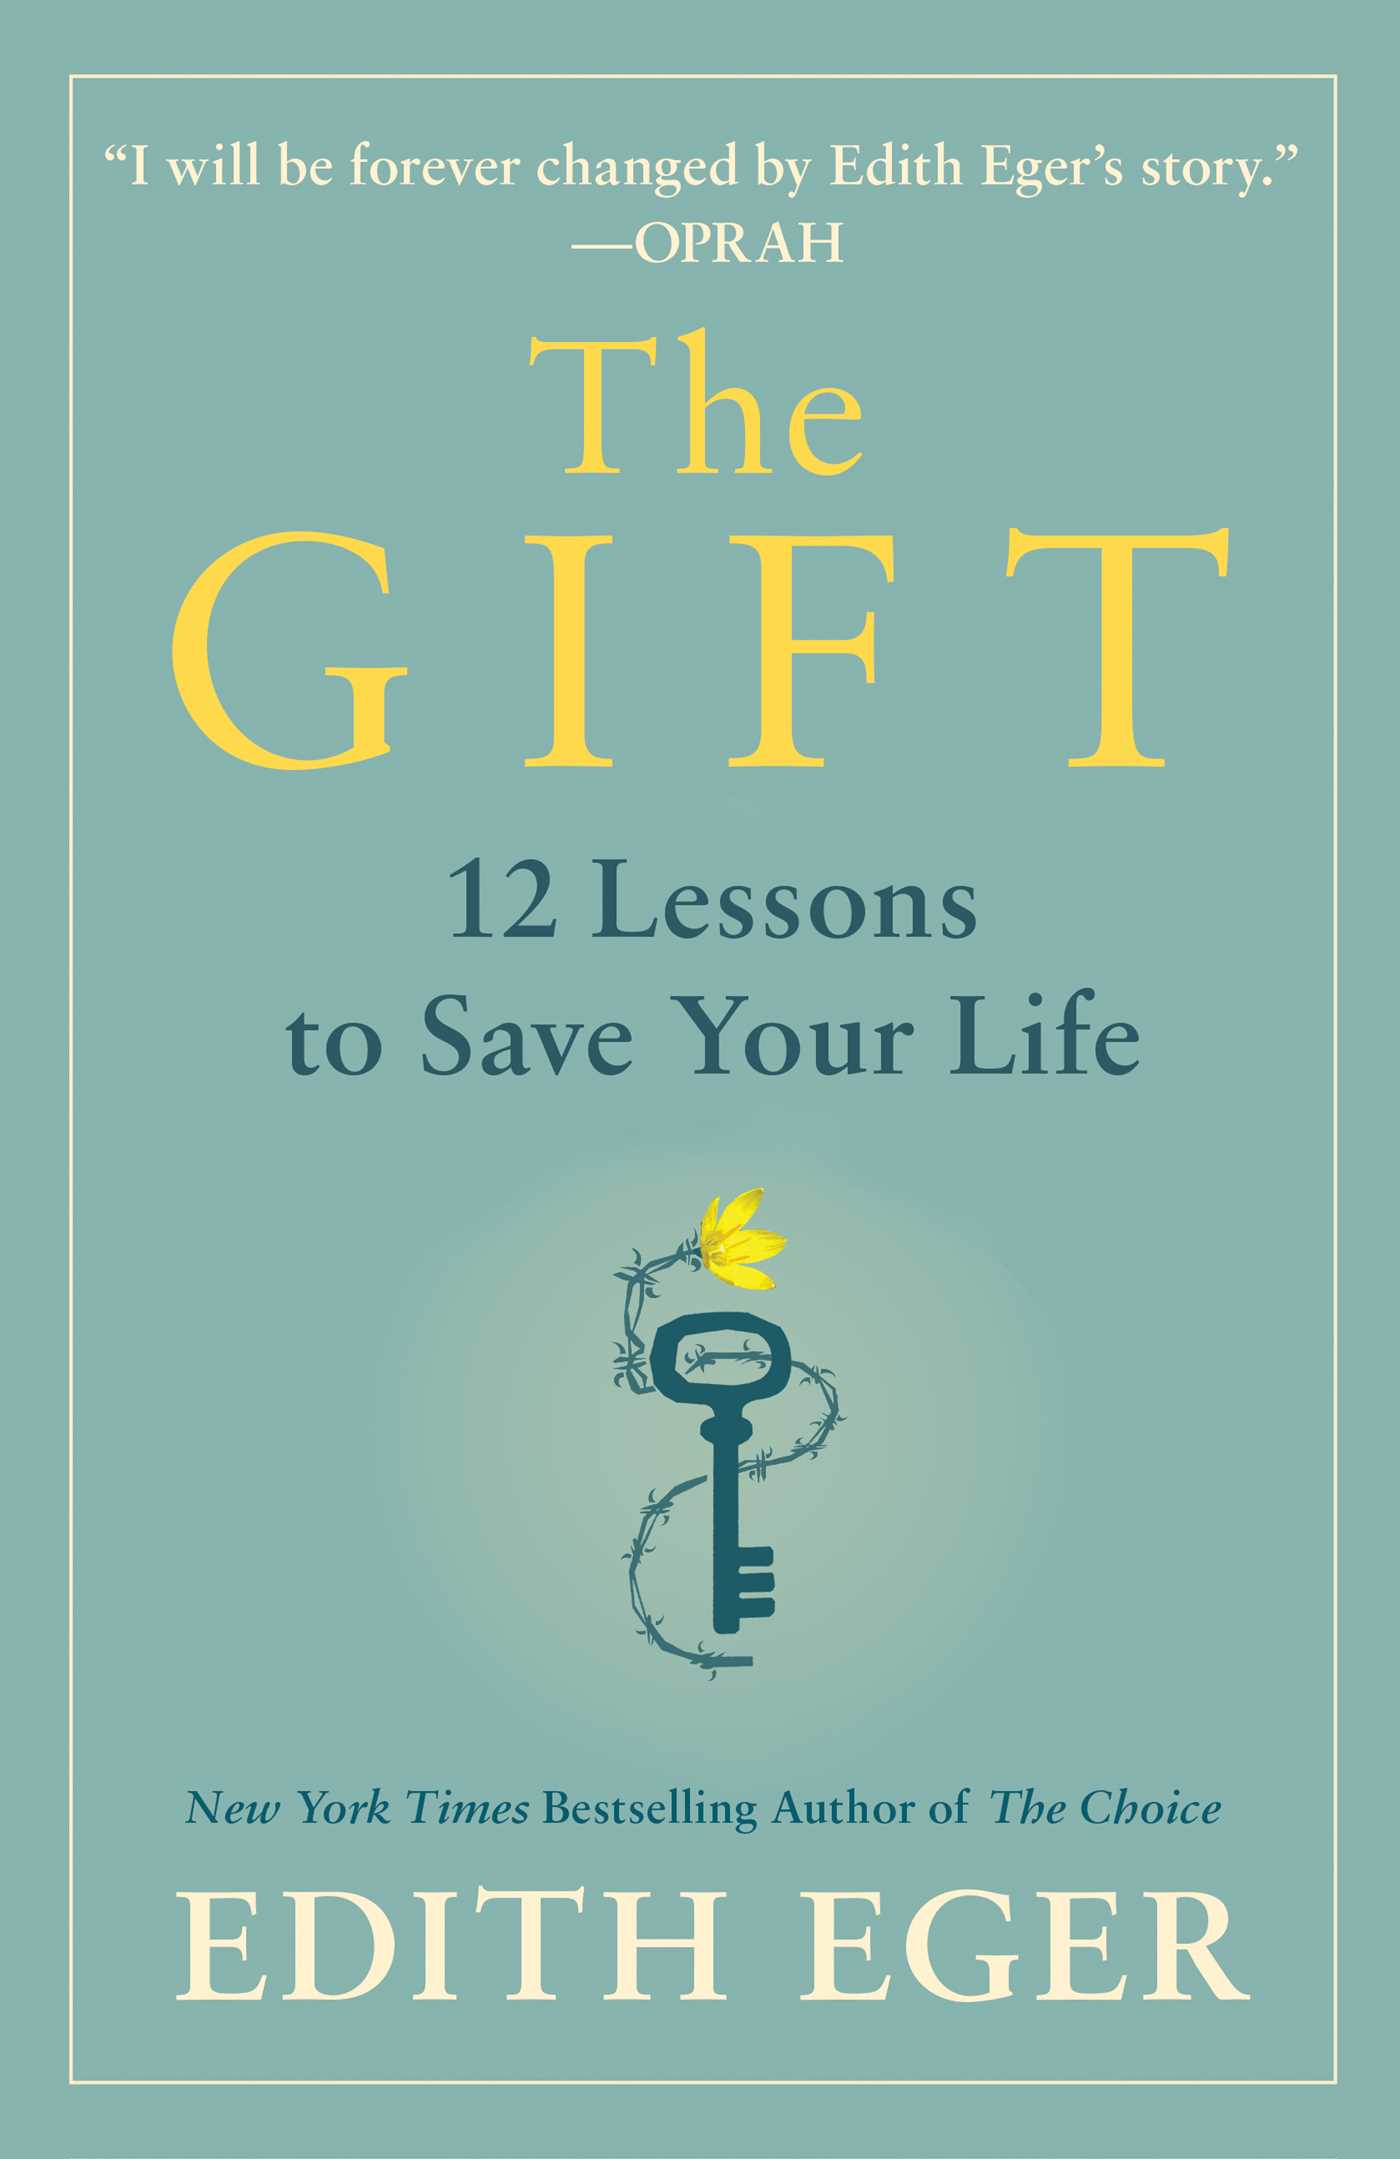 [EPUB] The Gift: 12 Lessons to Save Your Life by Edith Eger